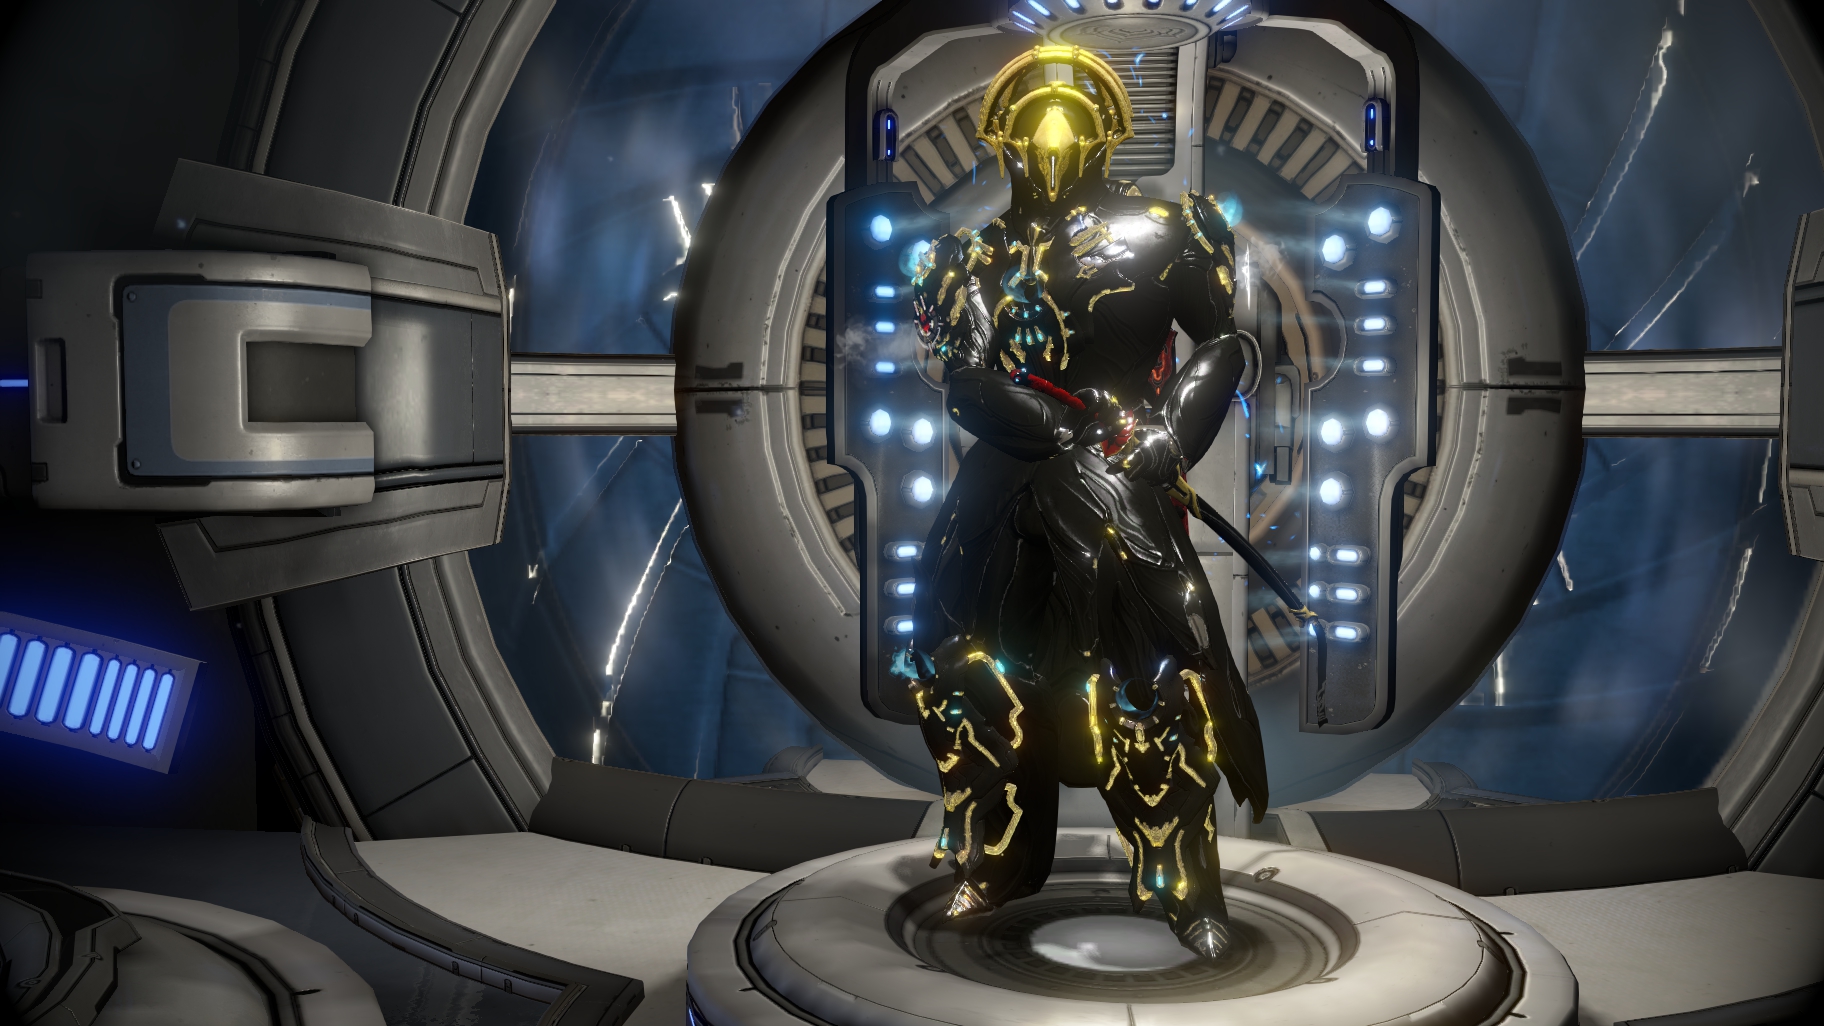 best mods for frost prime